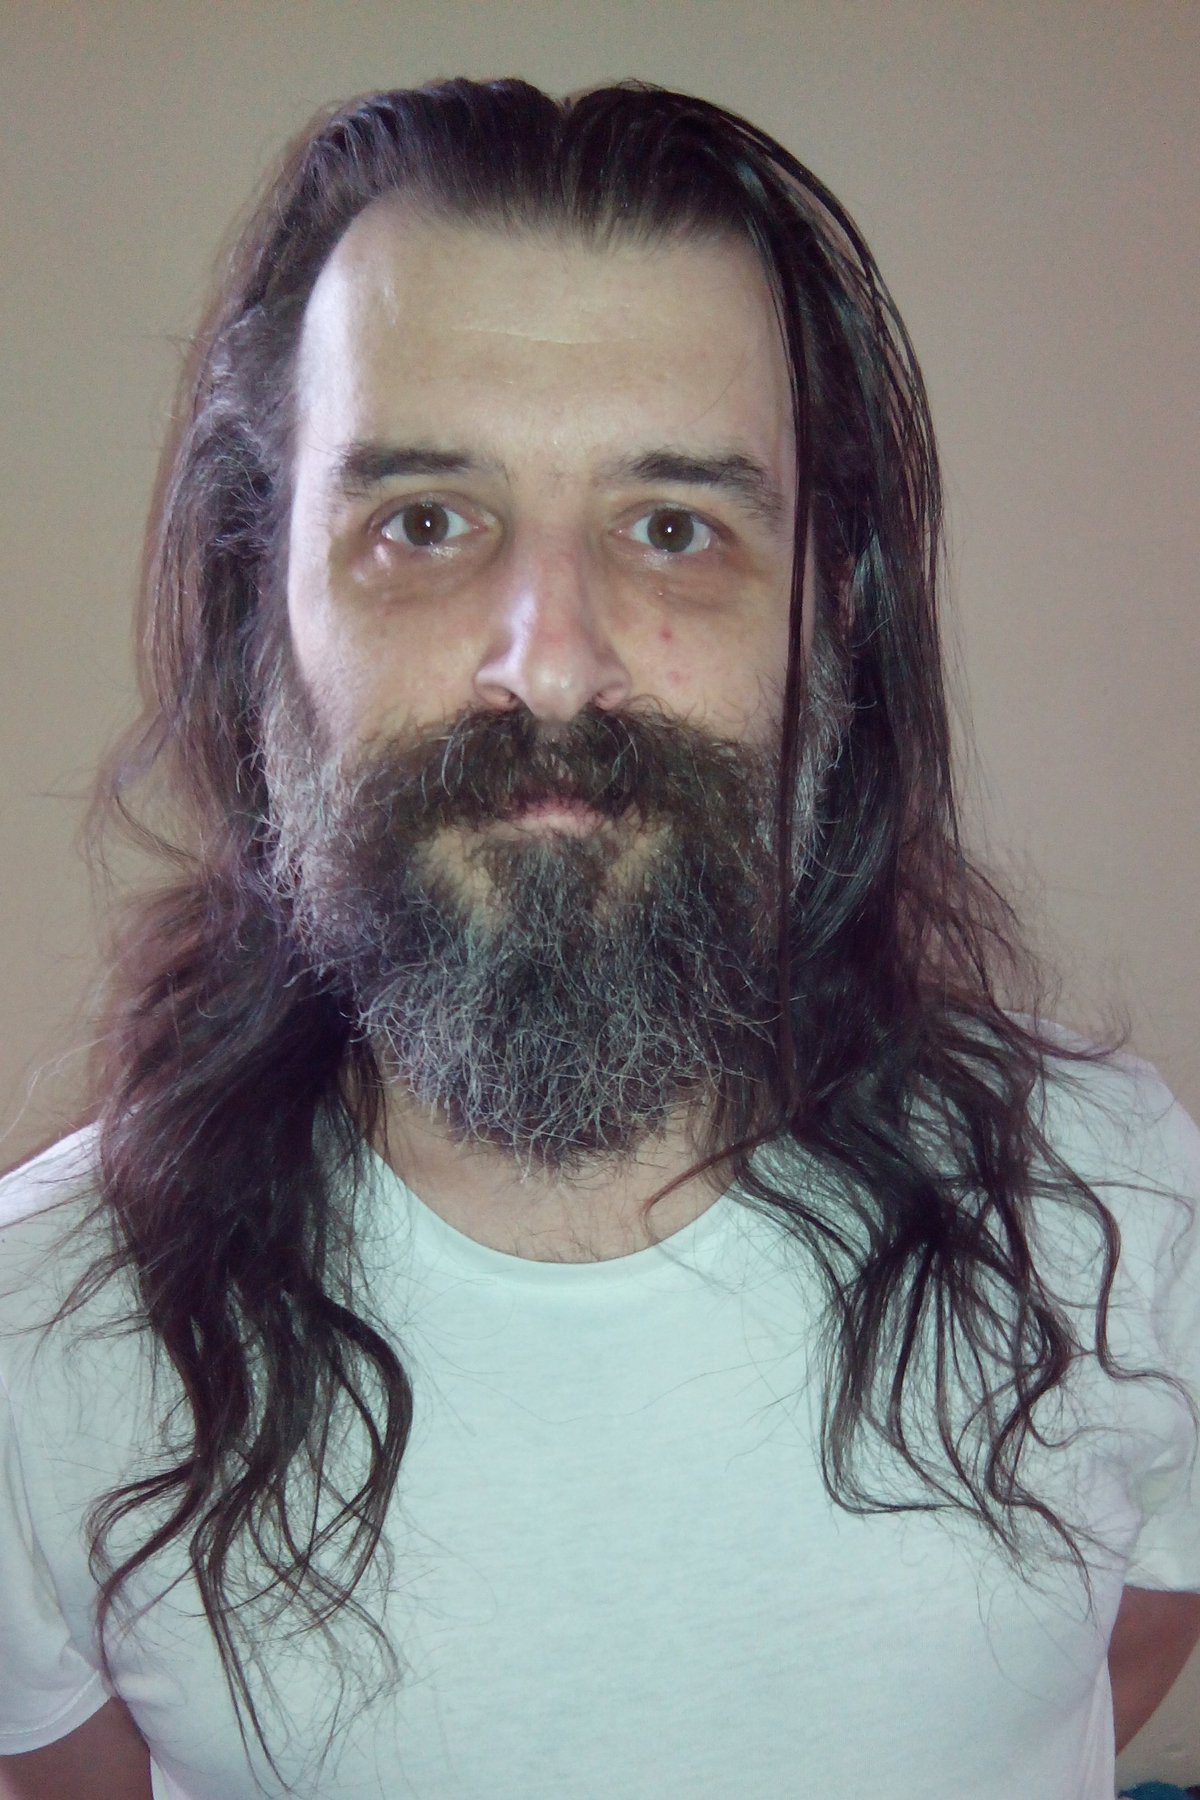 Long hair and beard to play Jesus Christ March 2015.